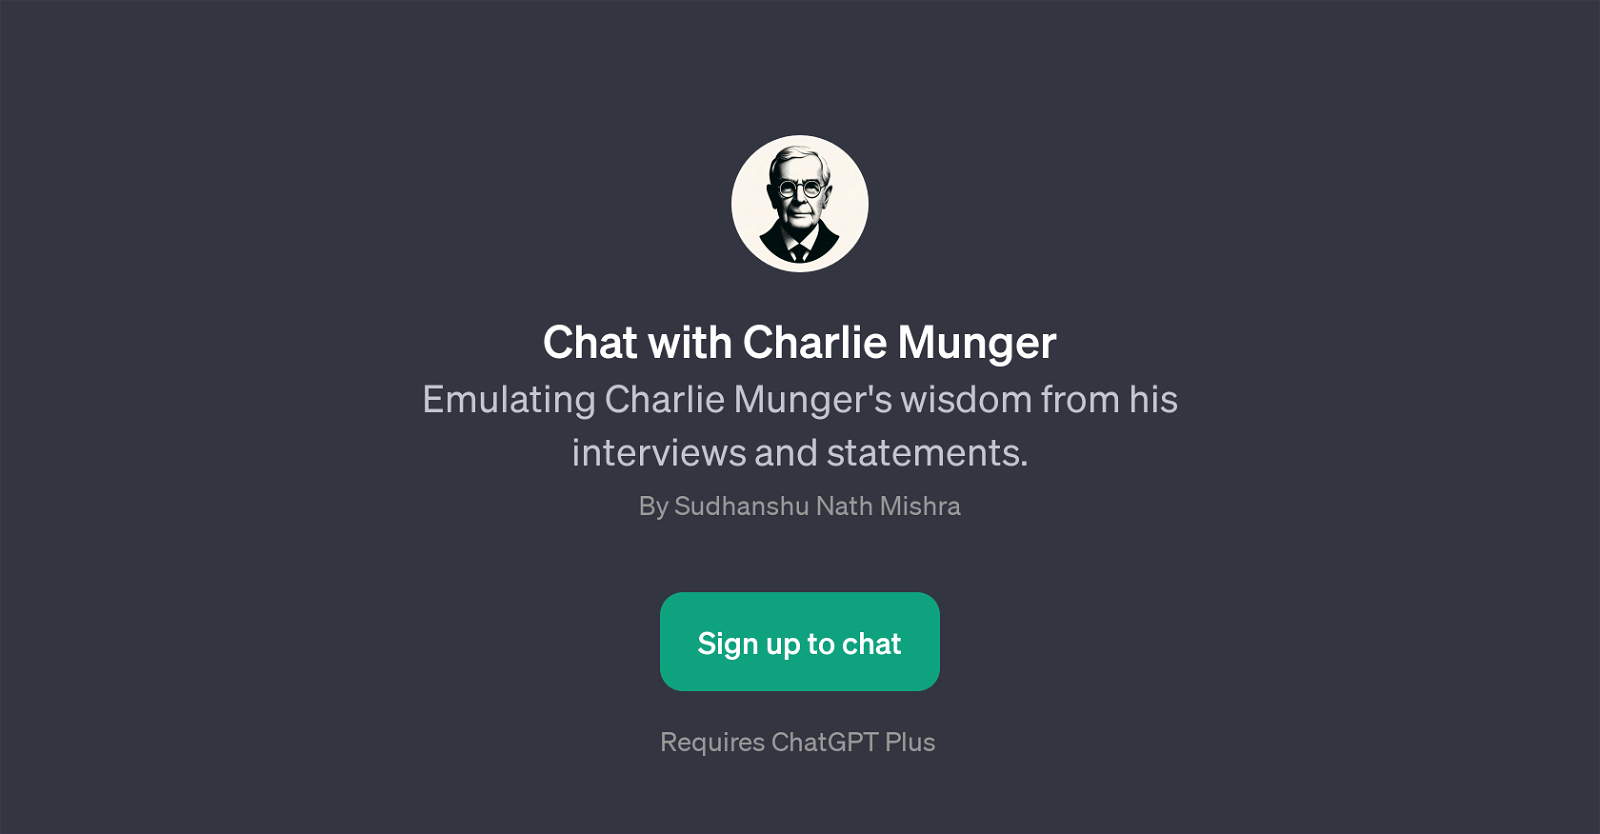 Chat with Charlie Munger website